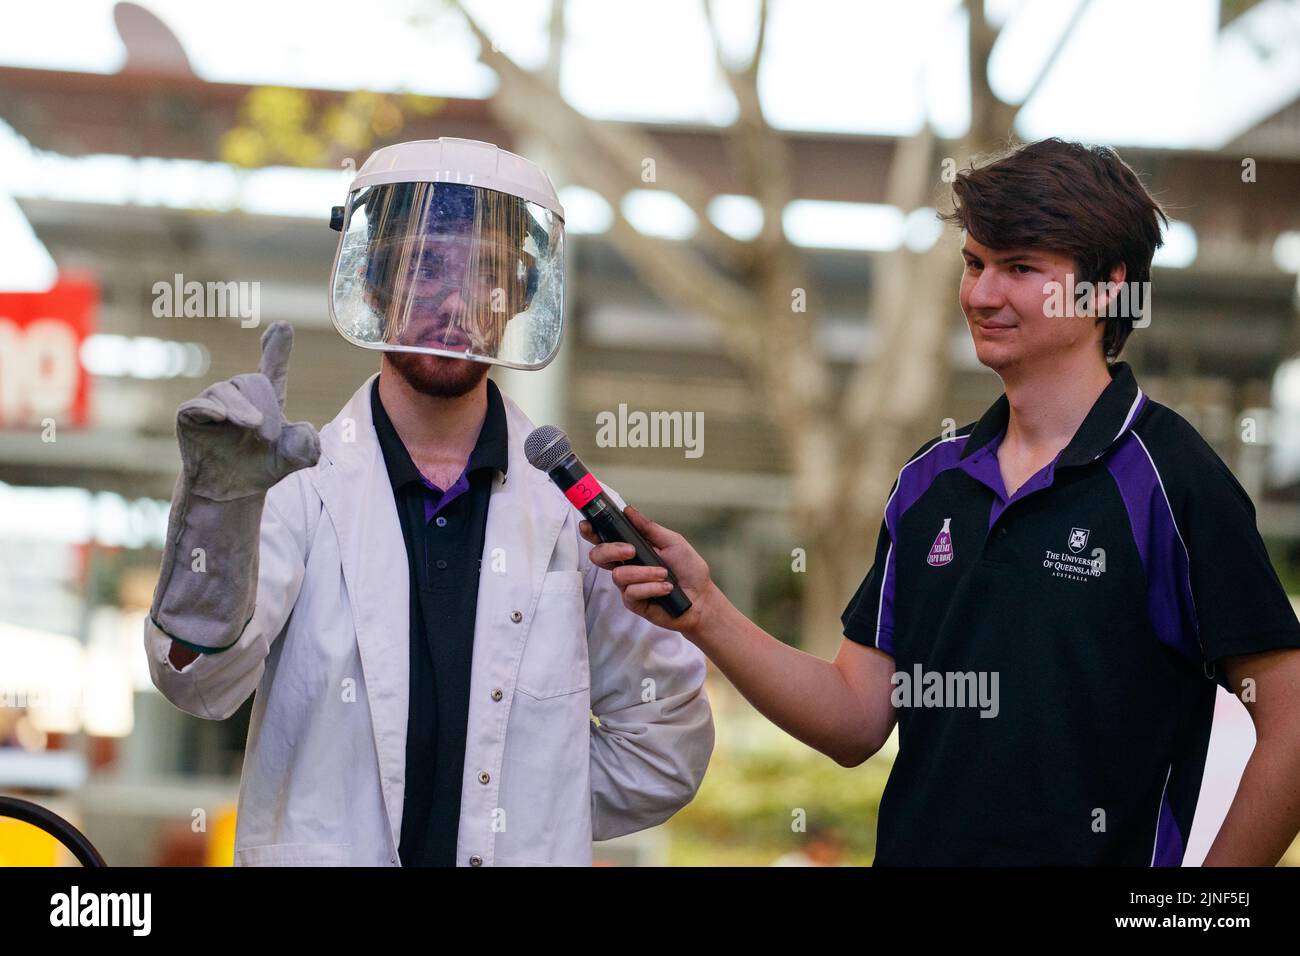 Brisbane, Australia. 11th Aug, 2022. Members of the University of Queensland's Science Demo Troupe present live experiments to an audience of school students and the public in Brisbane's Queen Street Mall on 11 August 2022. Live experiments and museum specimen displays were performed in Brisbane's Queen Street Mall for the launch of National Science Week. National Science Week was established in 1997 to acknowledge the contributions of Australian scientists and technology. (Photo by Joshua Prieto/Sipa USA) Credit: Sipa USA/Alamy Live News Stock Photo